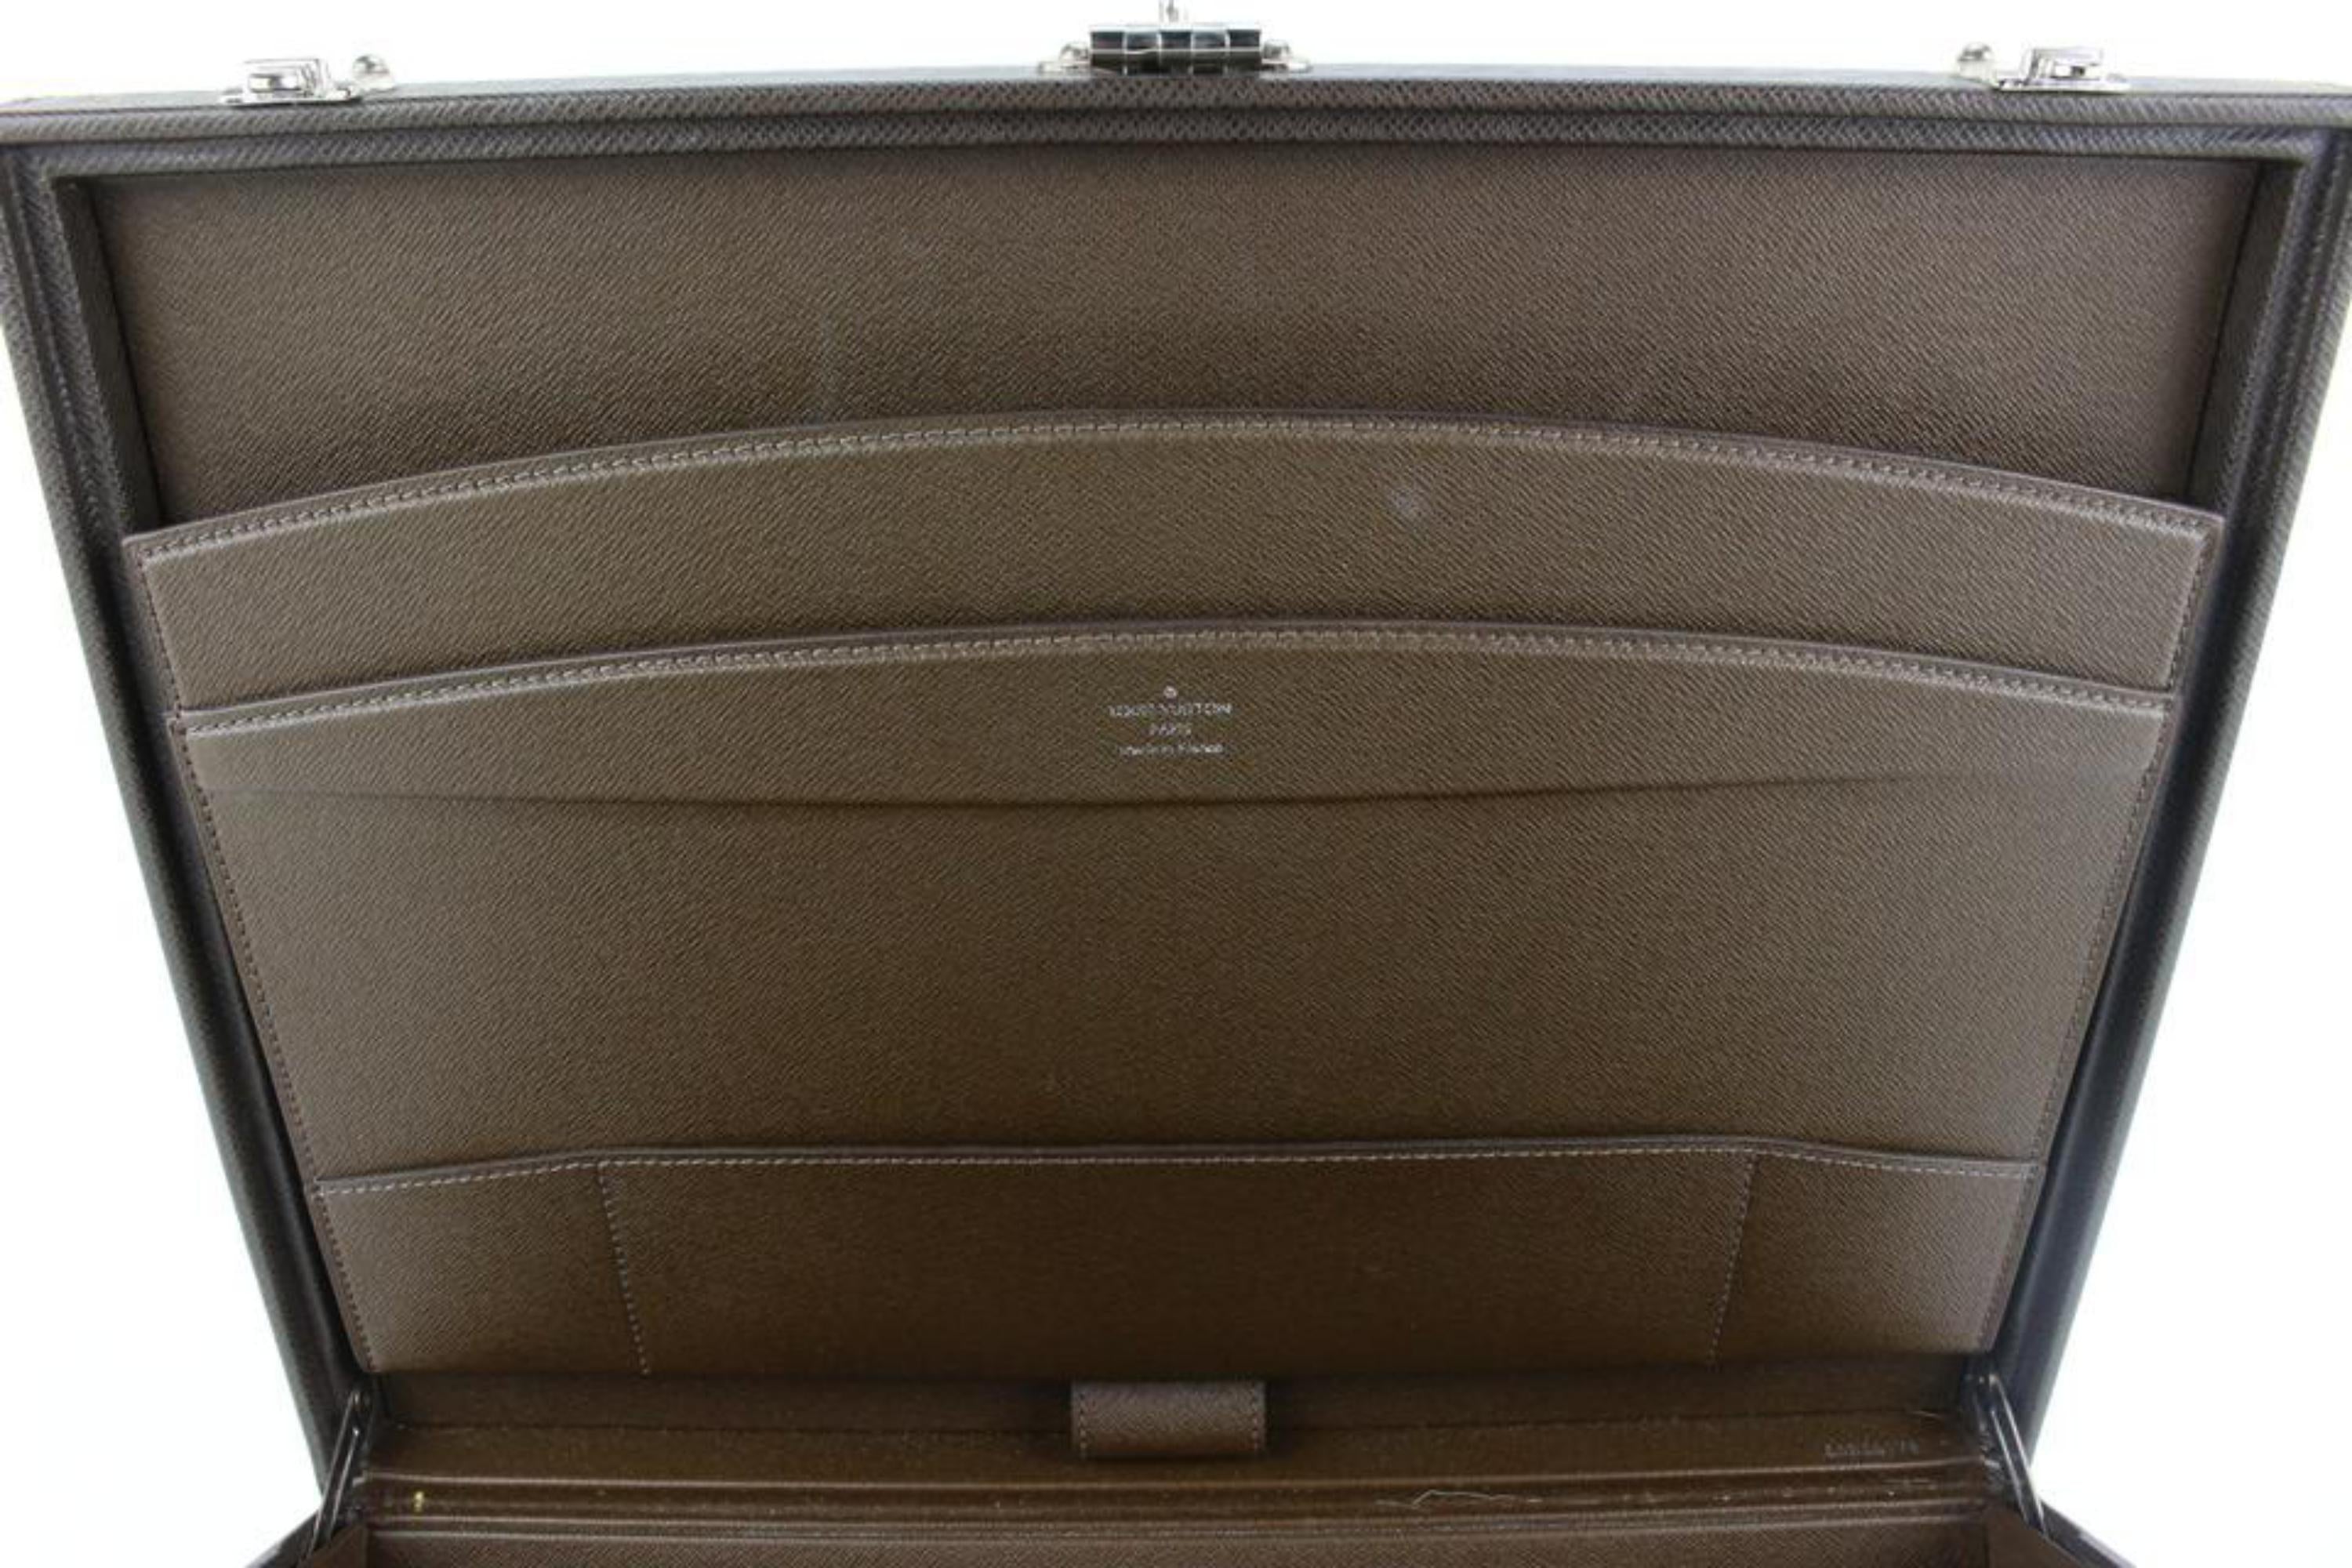 Lot - A Louis Vuitton Grizzli Taiga leather Robusto briefcase